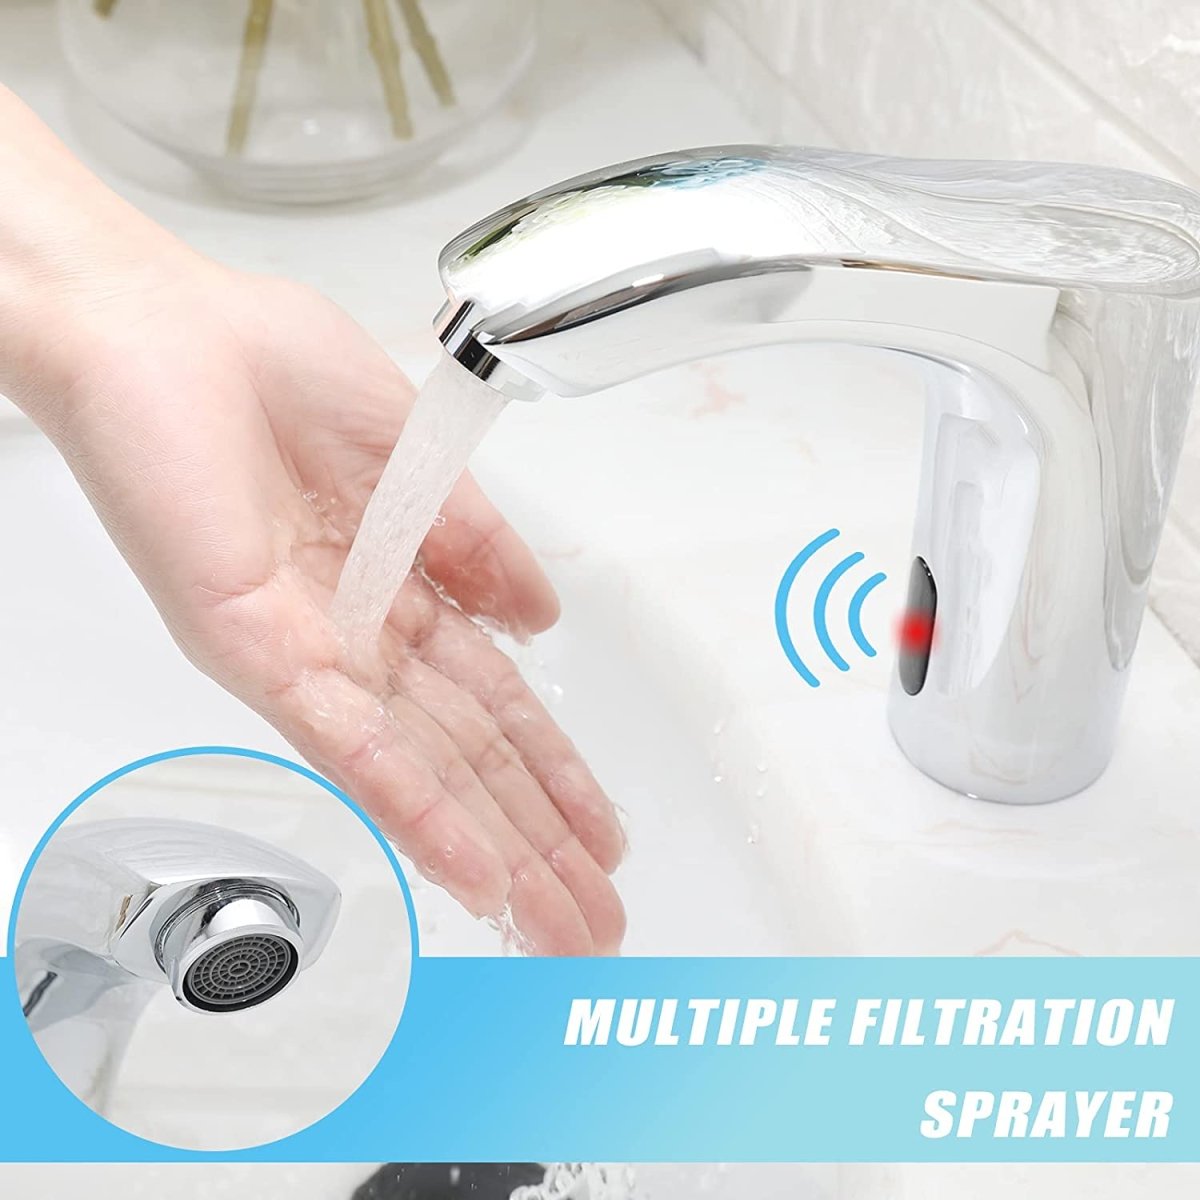 Touchless Bathroom Faucet With Deckplate Drain Chrome - buyfaucet.com